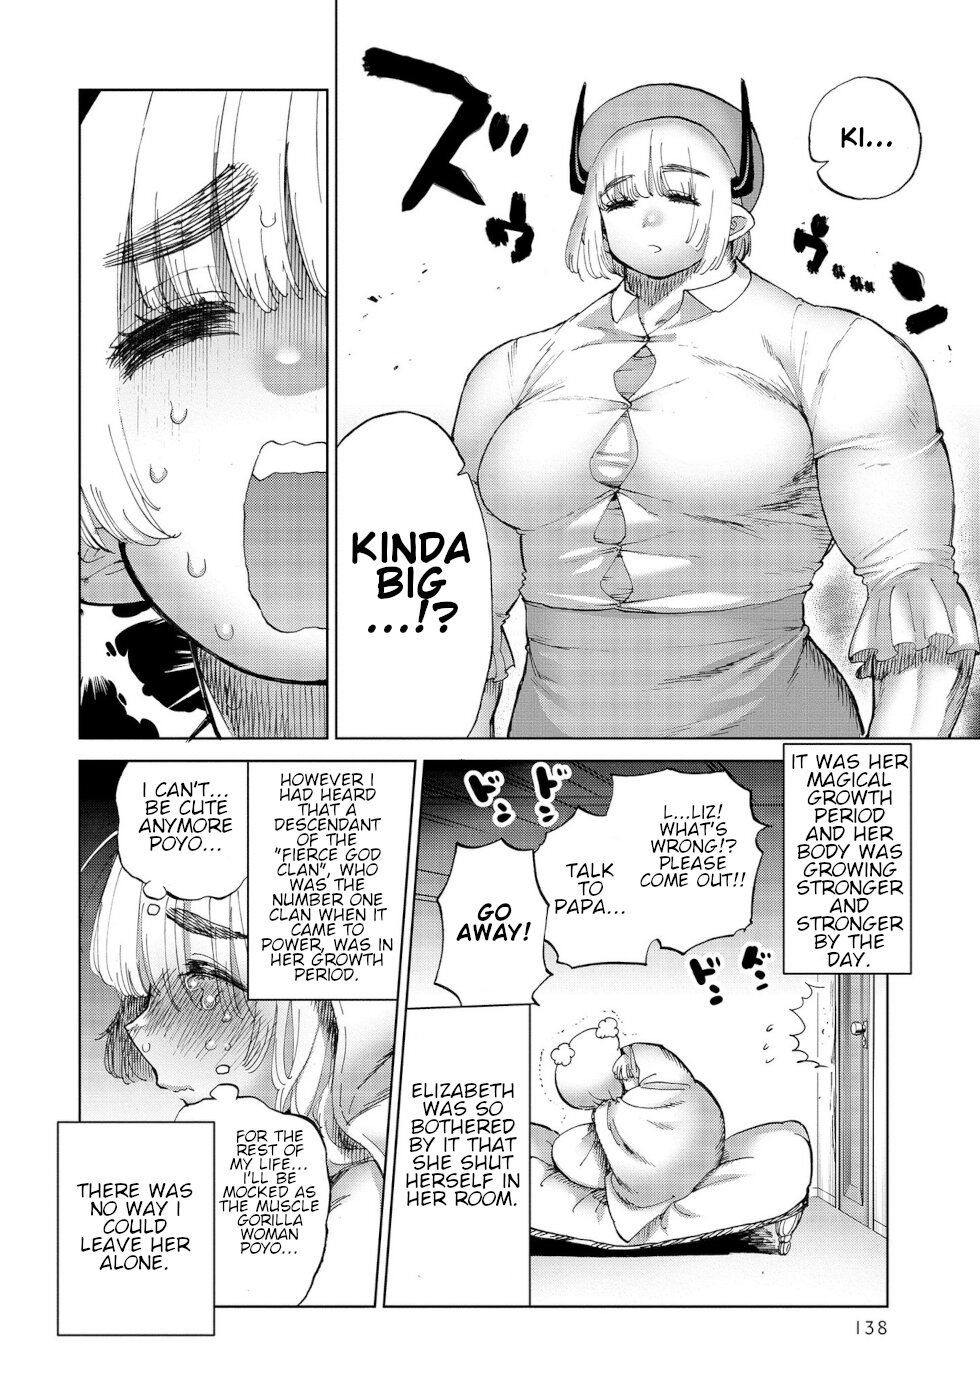 The Hero And The Demon King's Romcom - Page 2